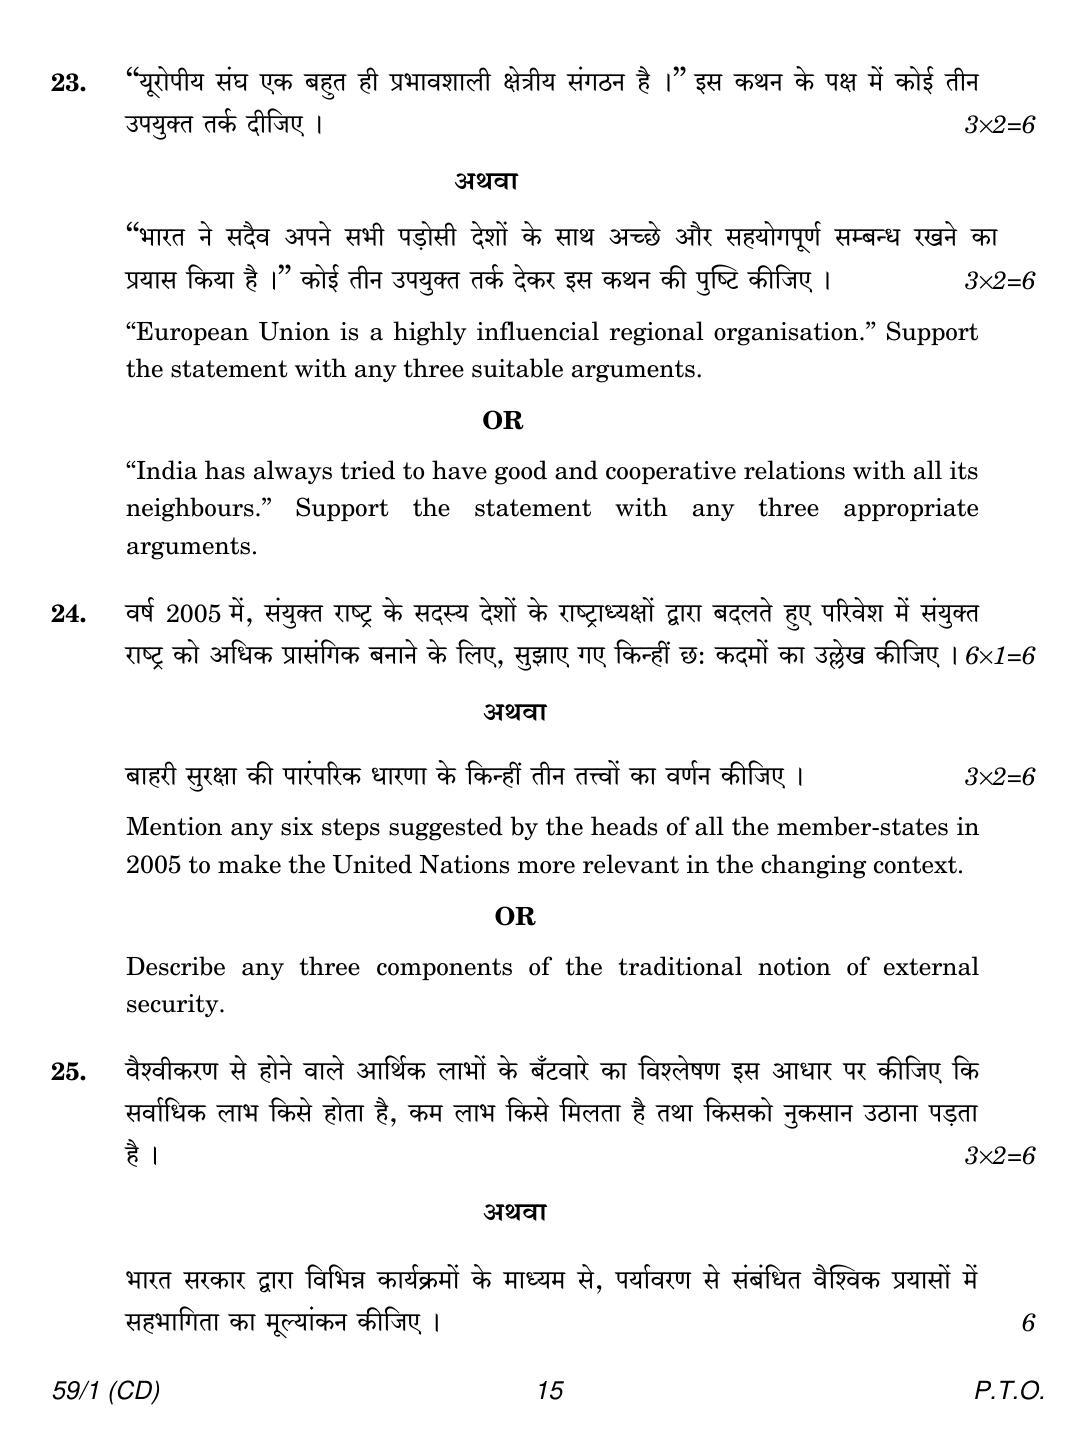 CBSE Class 12 59-1 POLITICAL SCIENCE CD 2018 Question Paper - Page 15